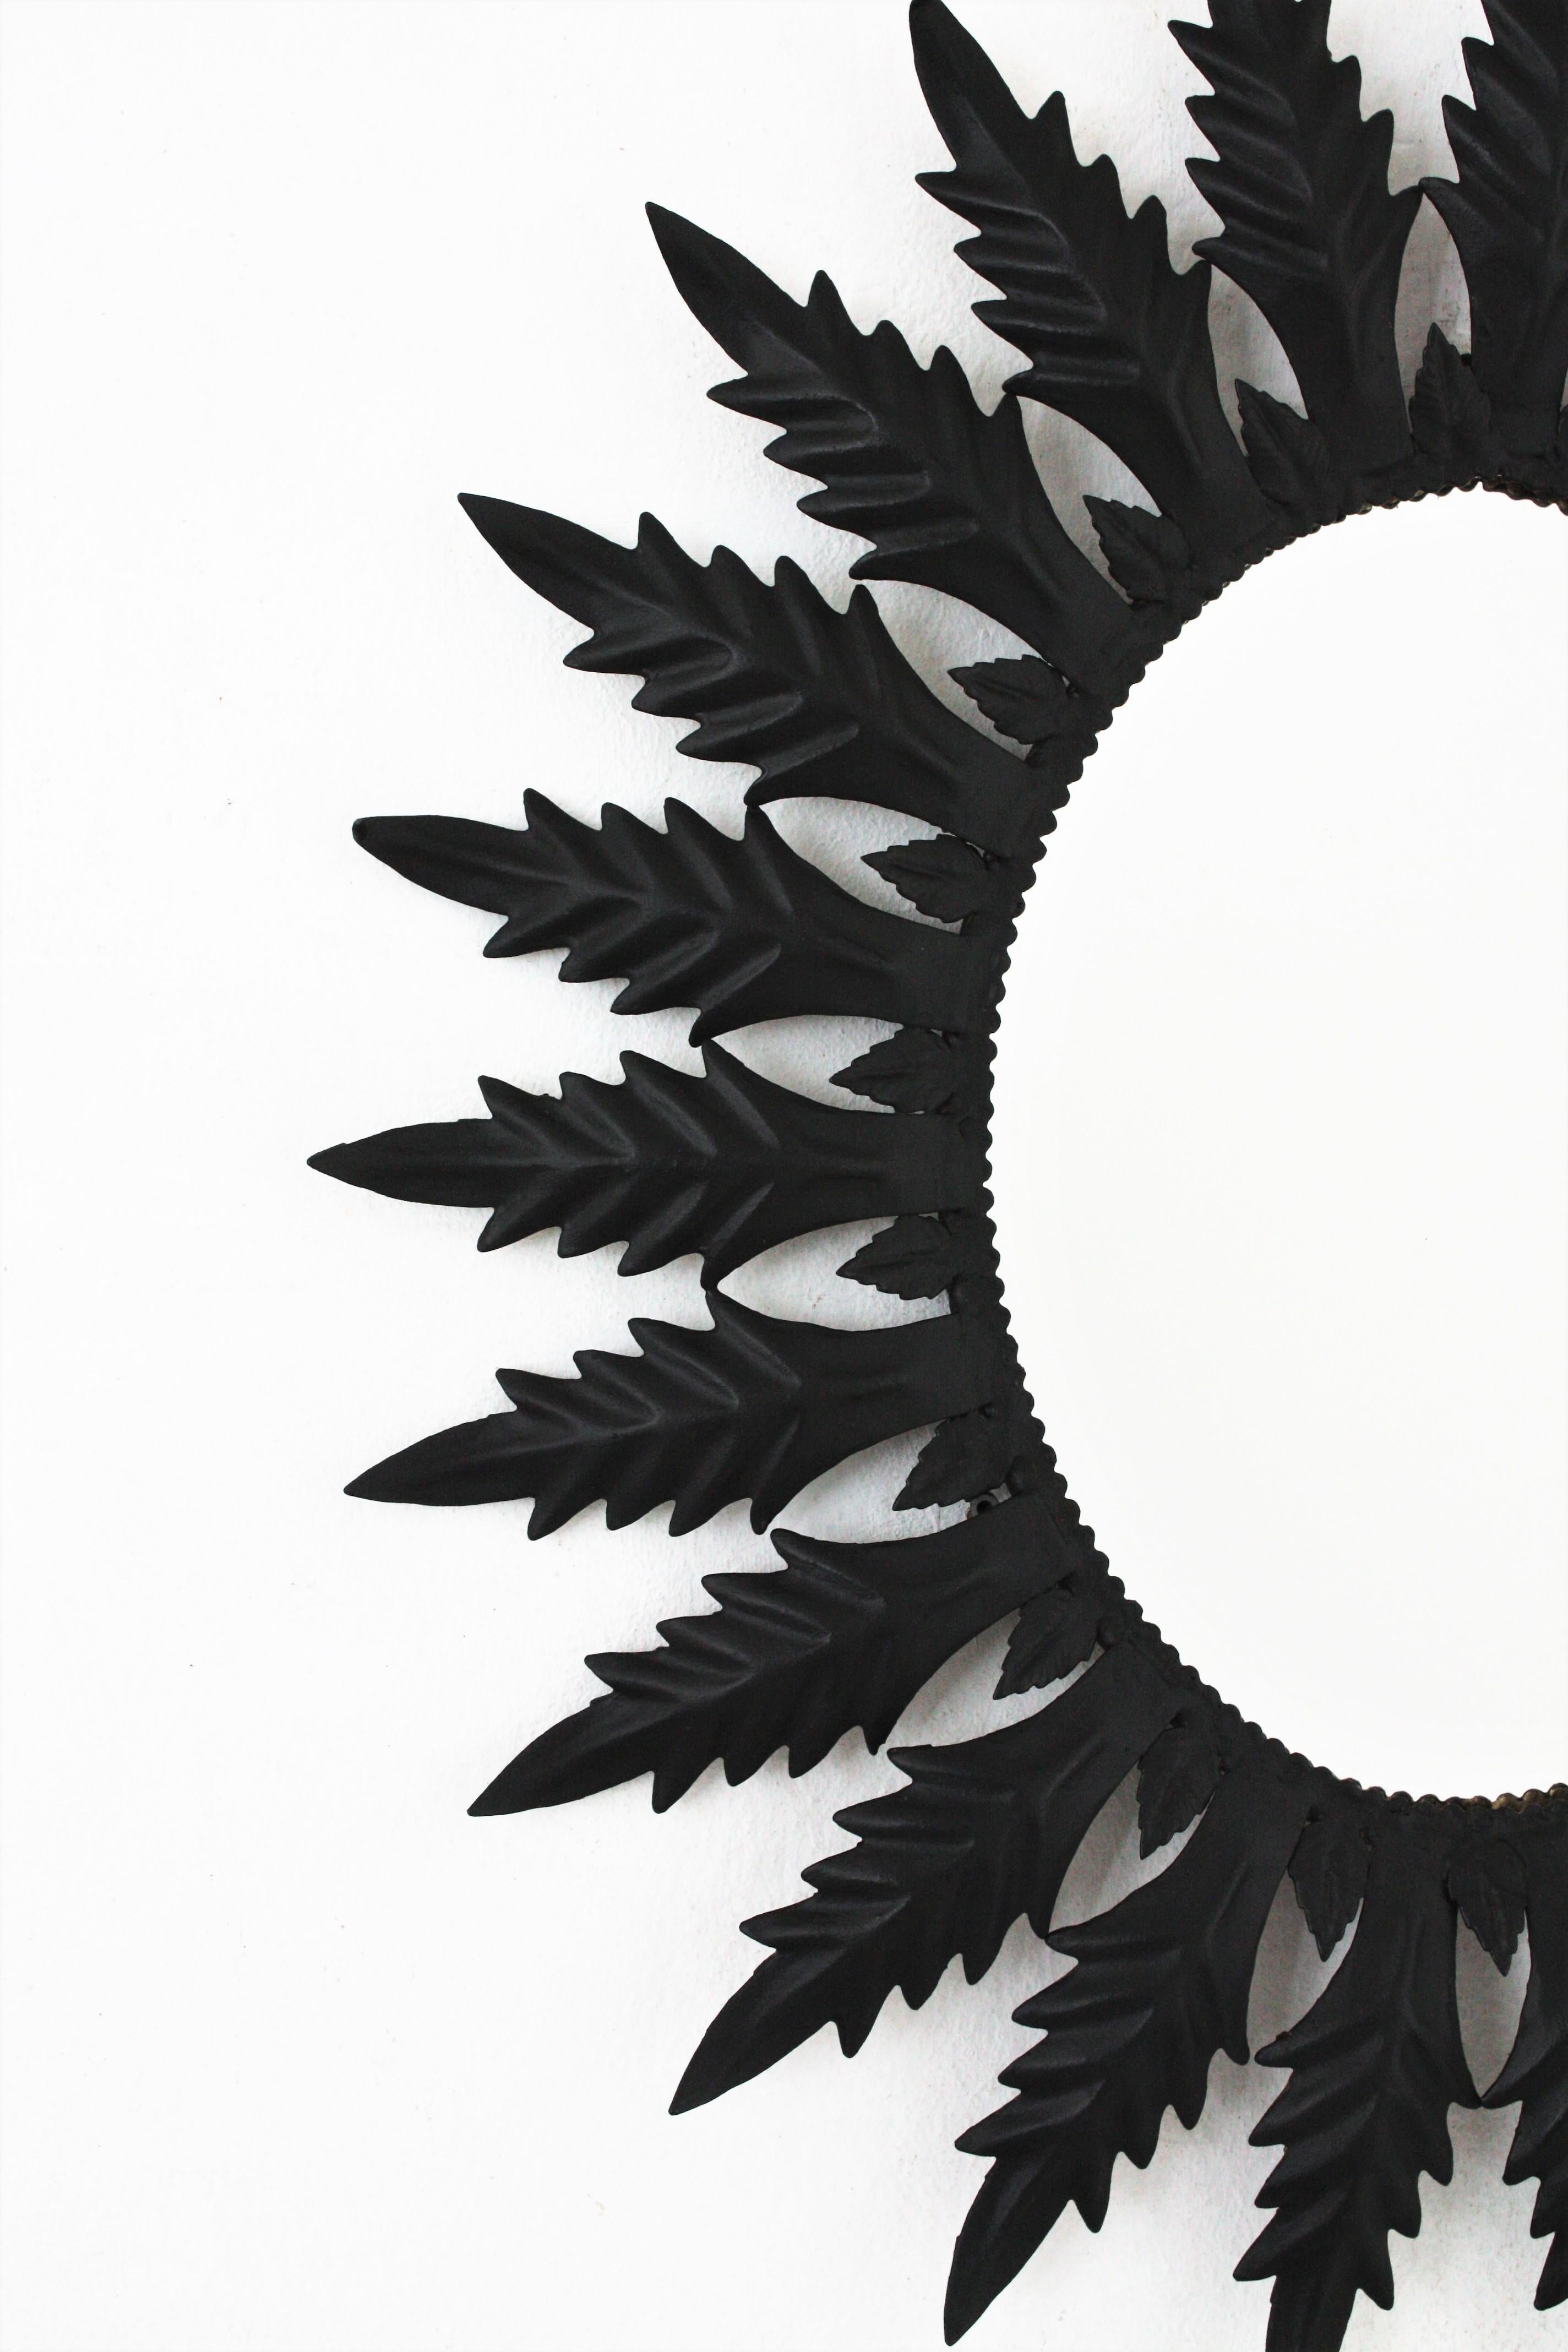 Spanish Sunburst Oval Mirror in Black Painted Iron, 1960s In Good Condition For Sale In Barcelona, ES